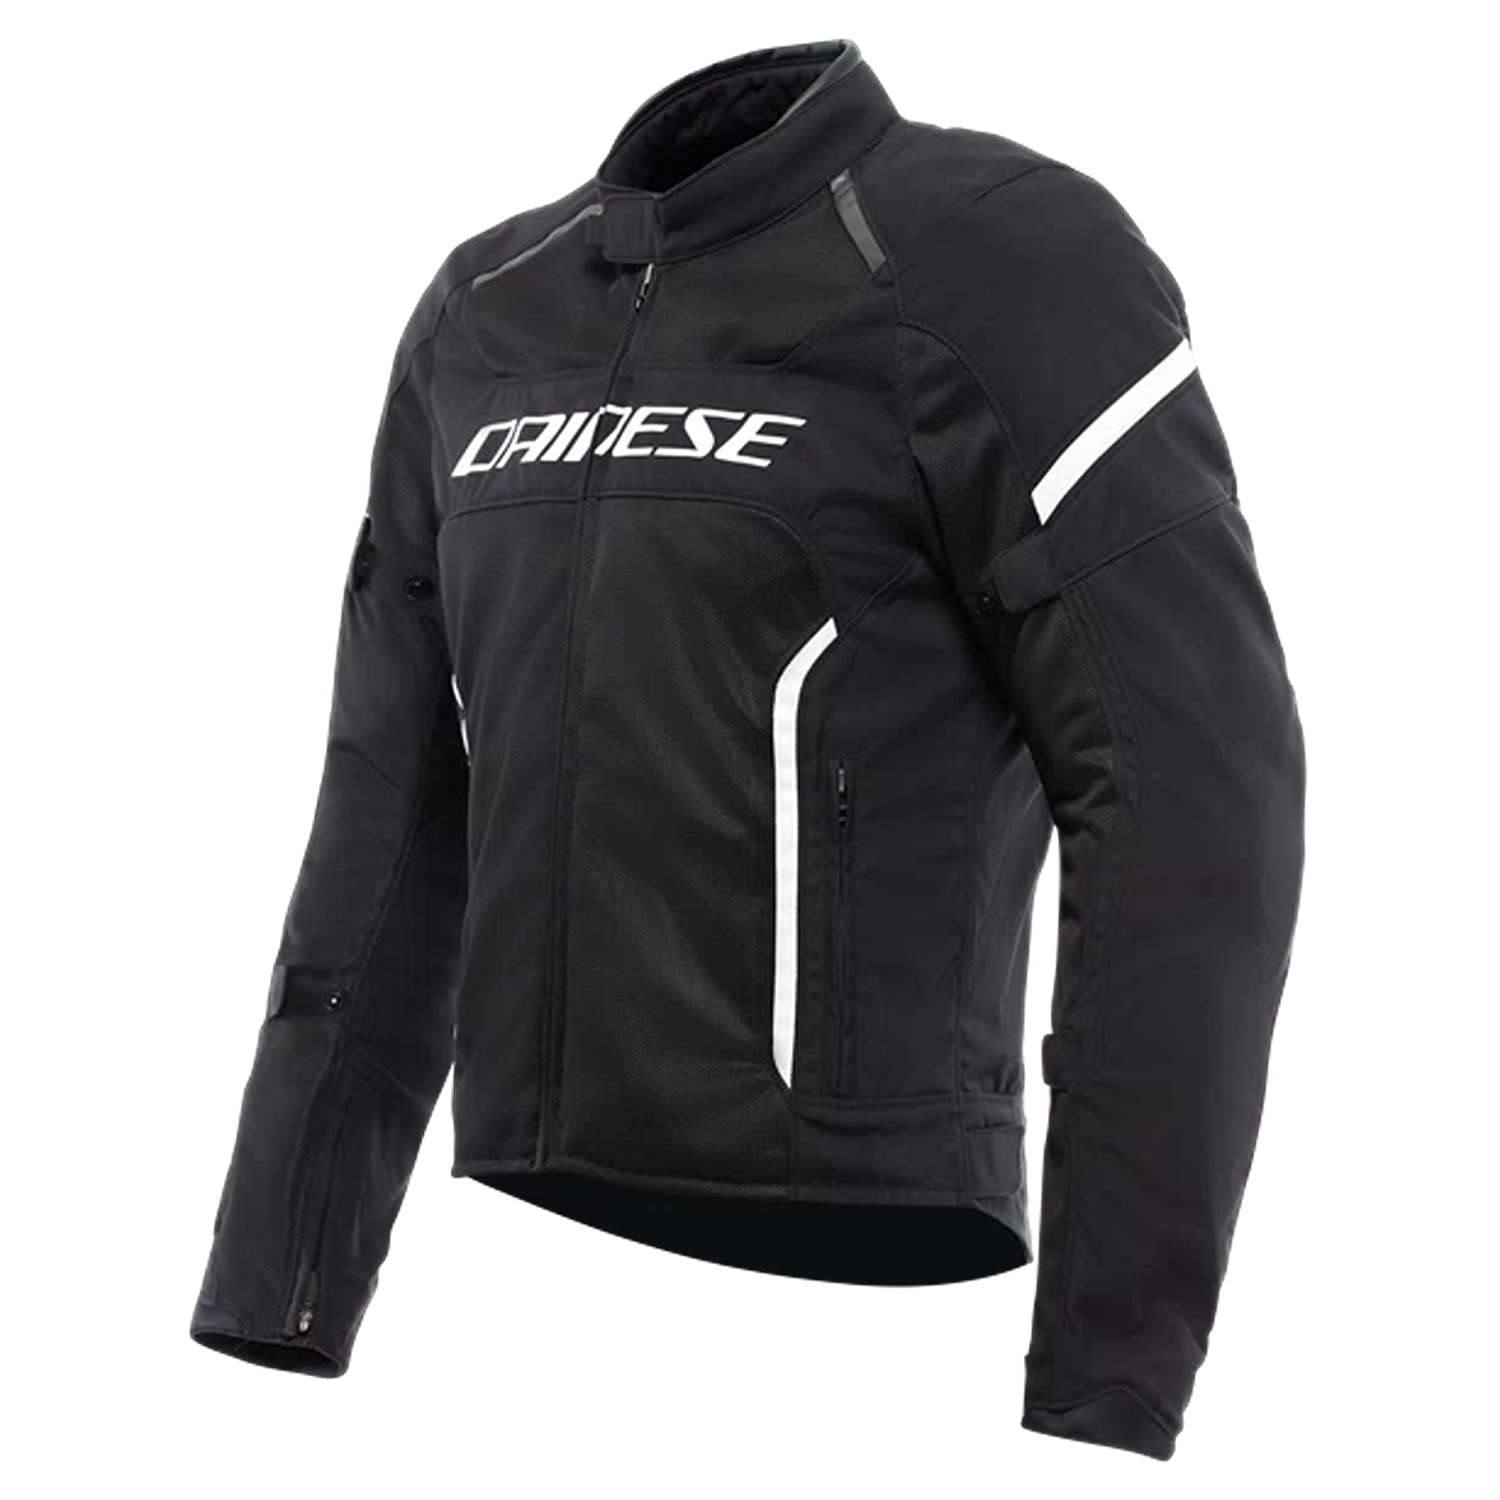 Image of Dainese Air Frame 3 Tex Jacket Black White Size 58 ID 8051019650559